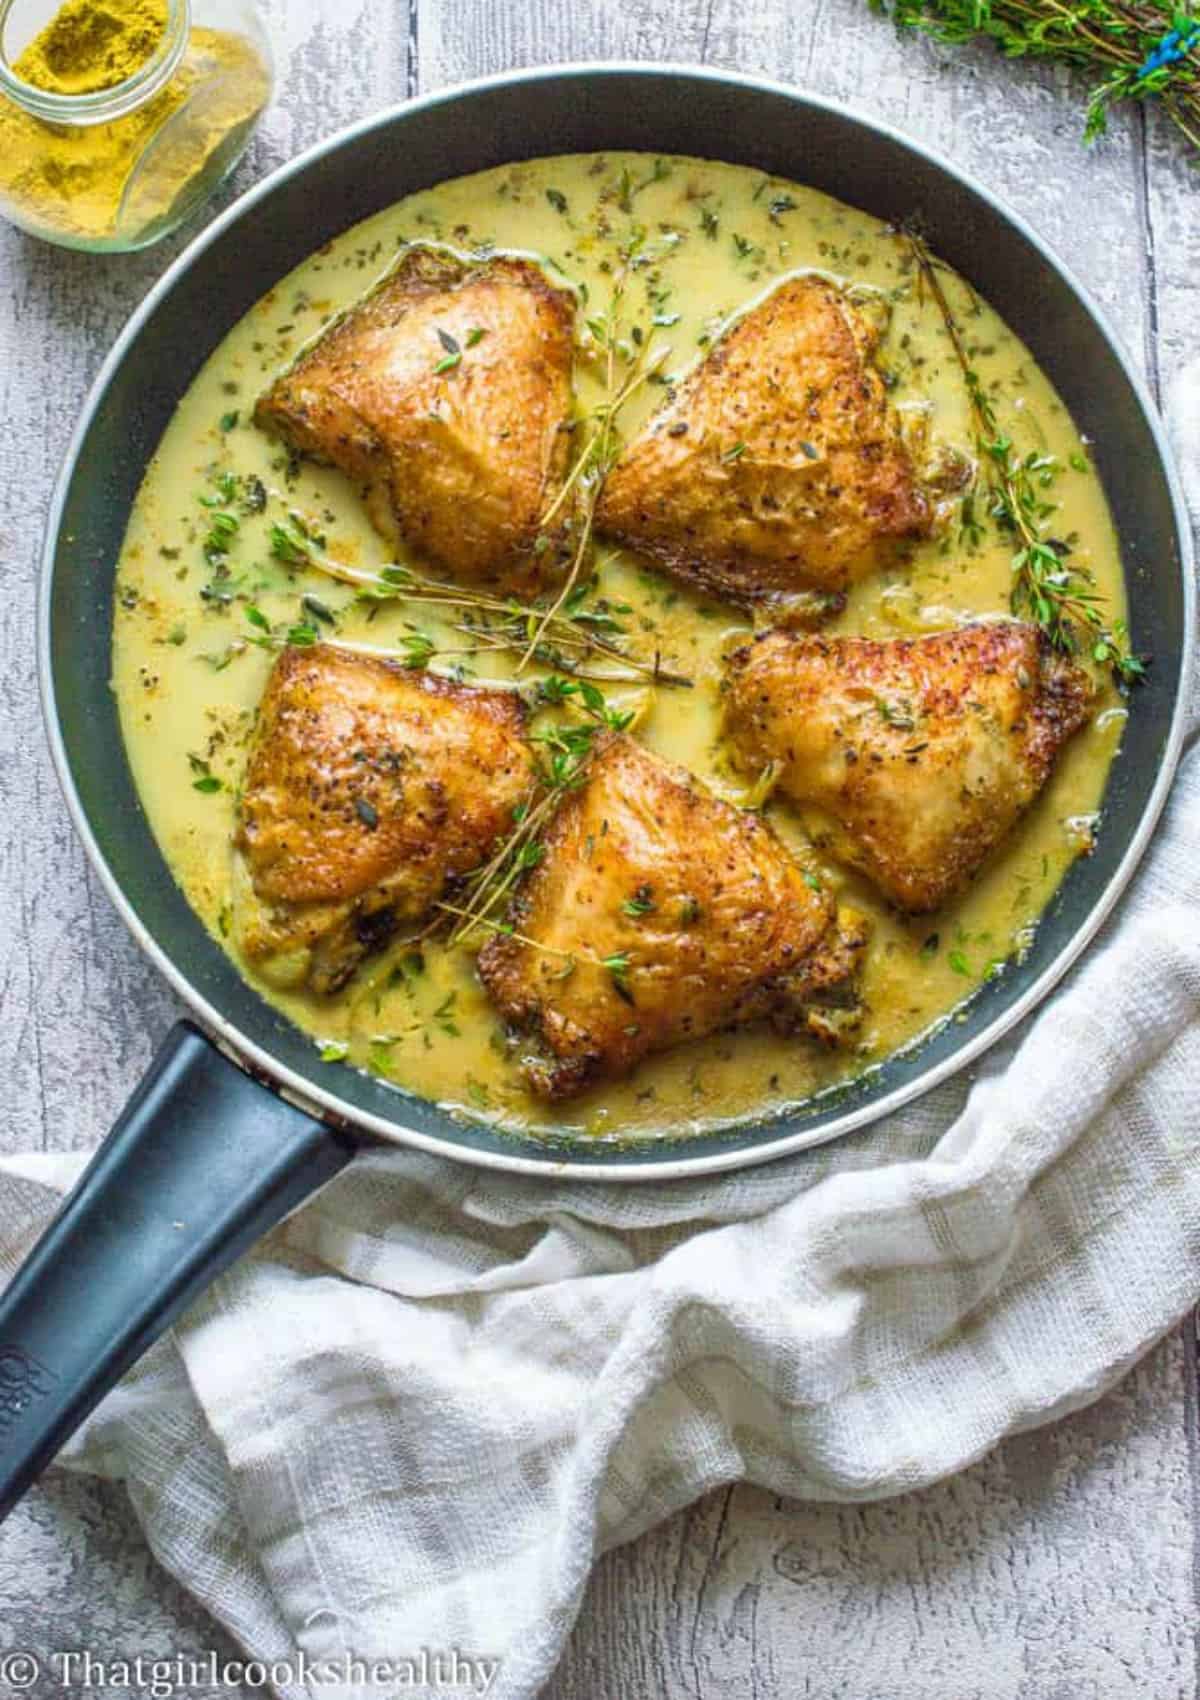 6 chicken thighs in a yellow coconut sauce